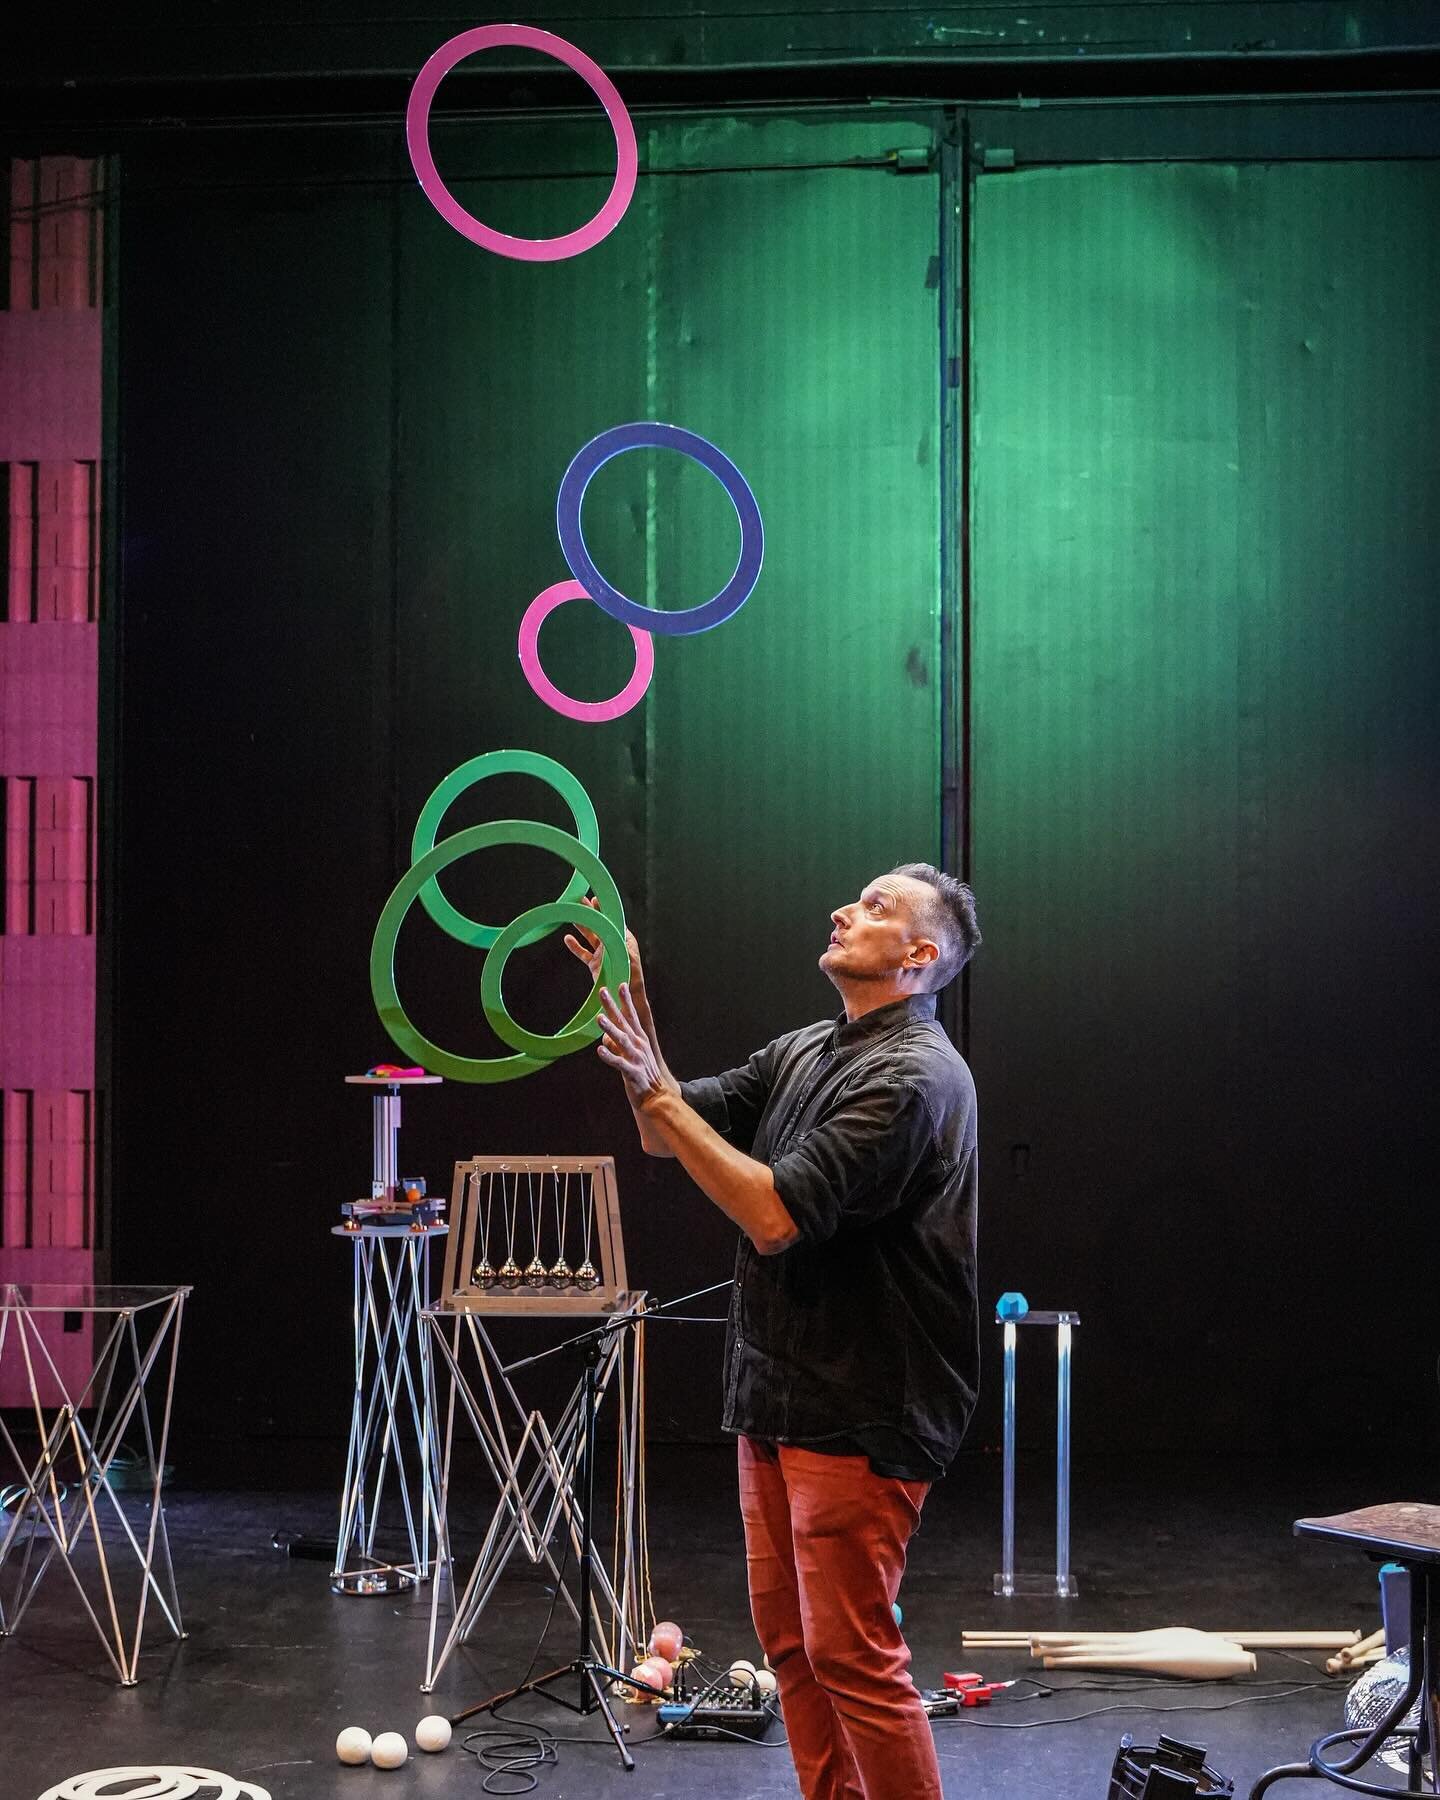 Tonight marks the grand return of REFLEX: Unraveling 4,000 Years of Juggling Off-Broadway at the intimate Nagelberg Theatre at Baruch Performing Arts Center in midtown Manhattan! If you experienced the enchantment in winter of 2022, brace yourself - 